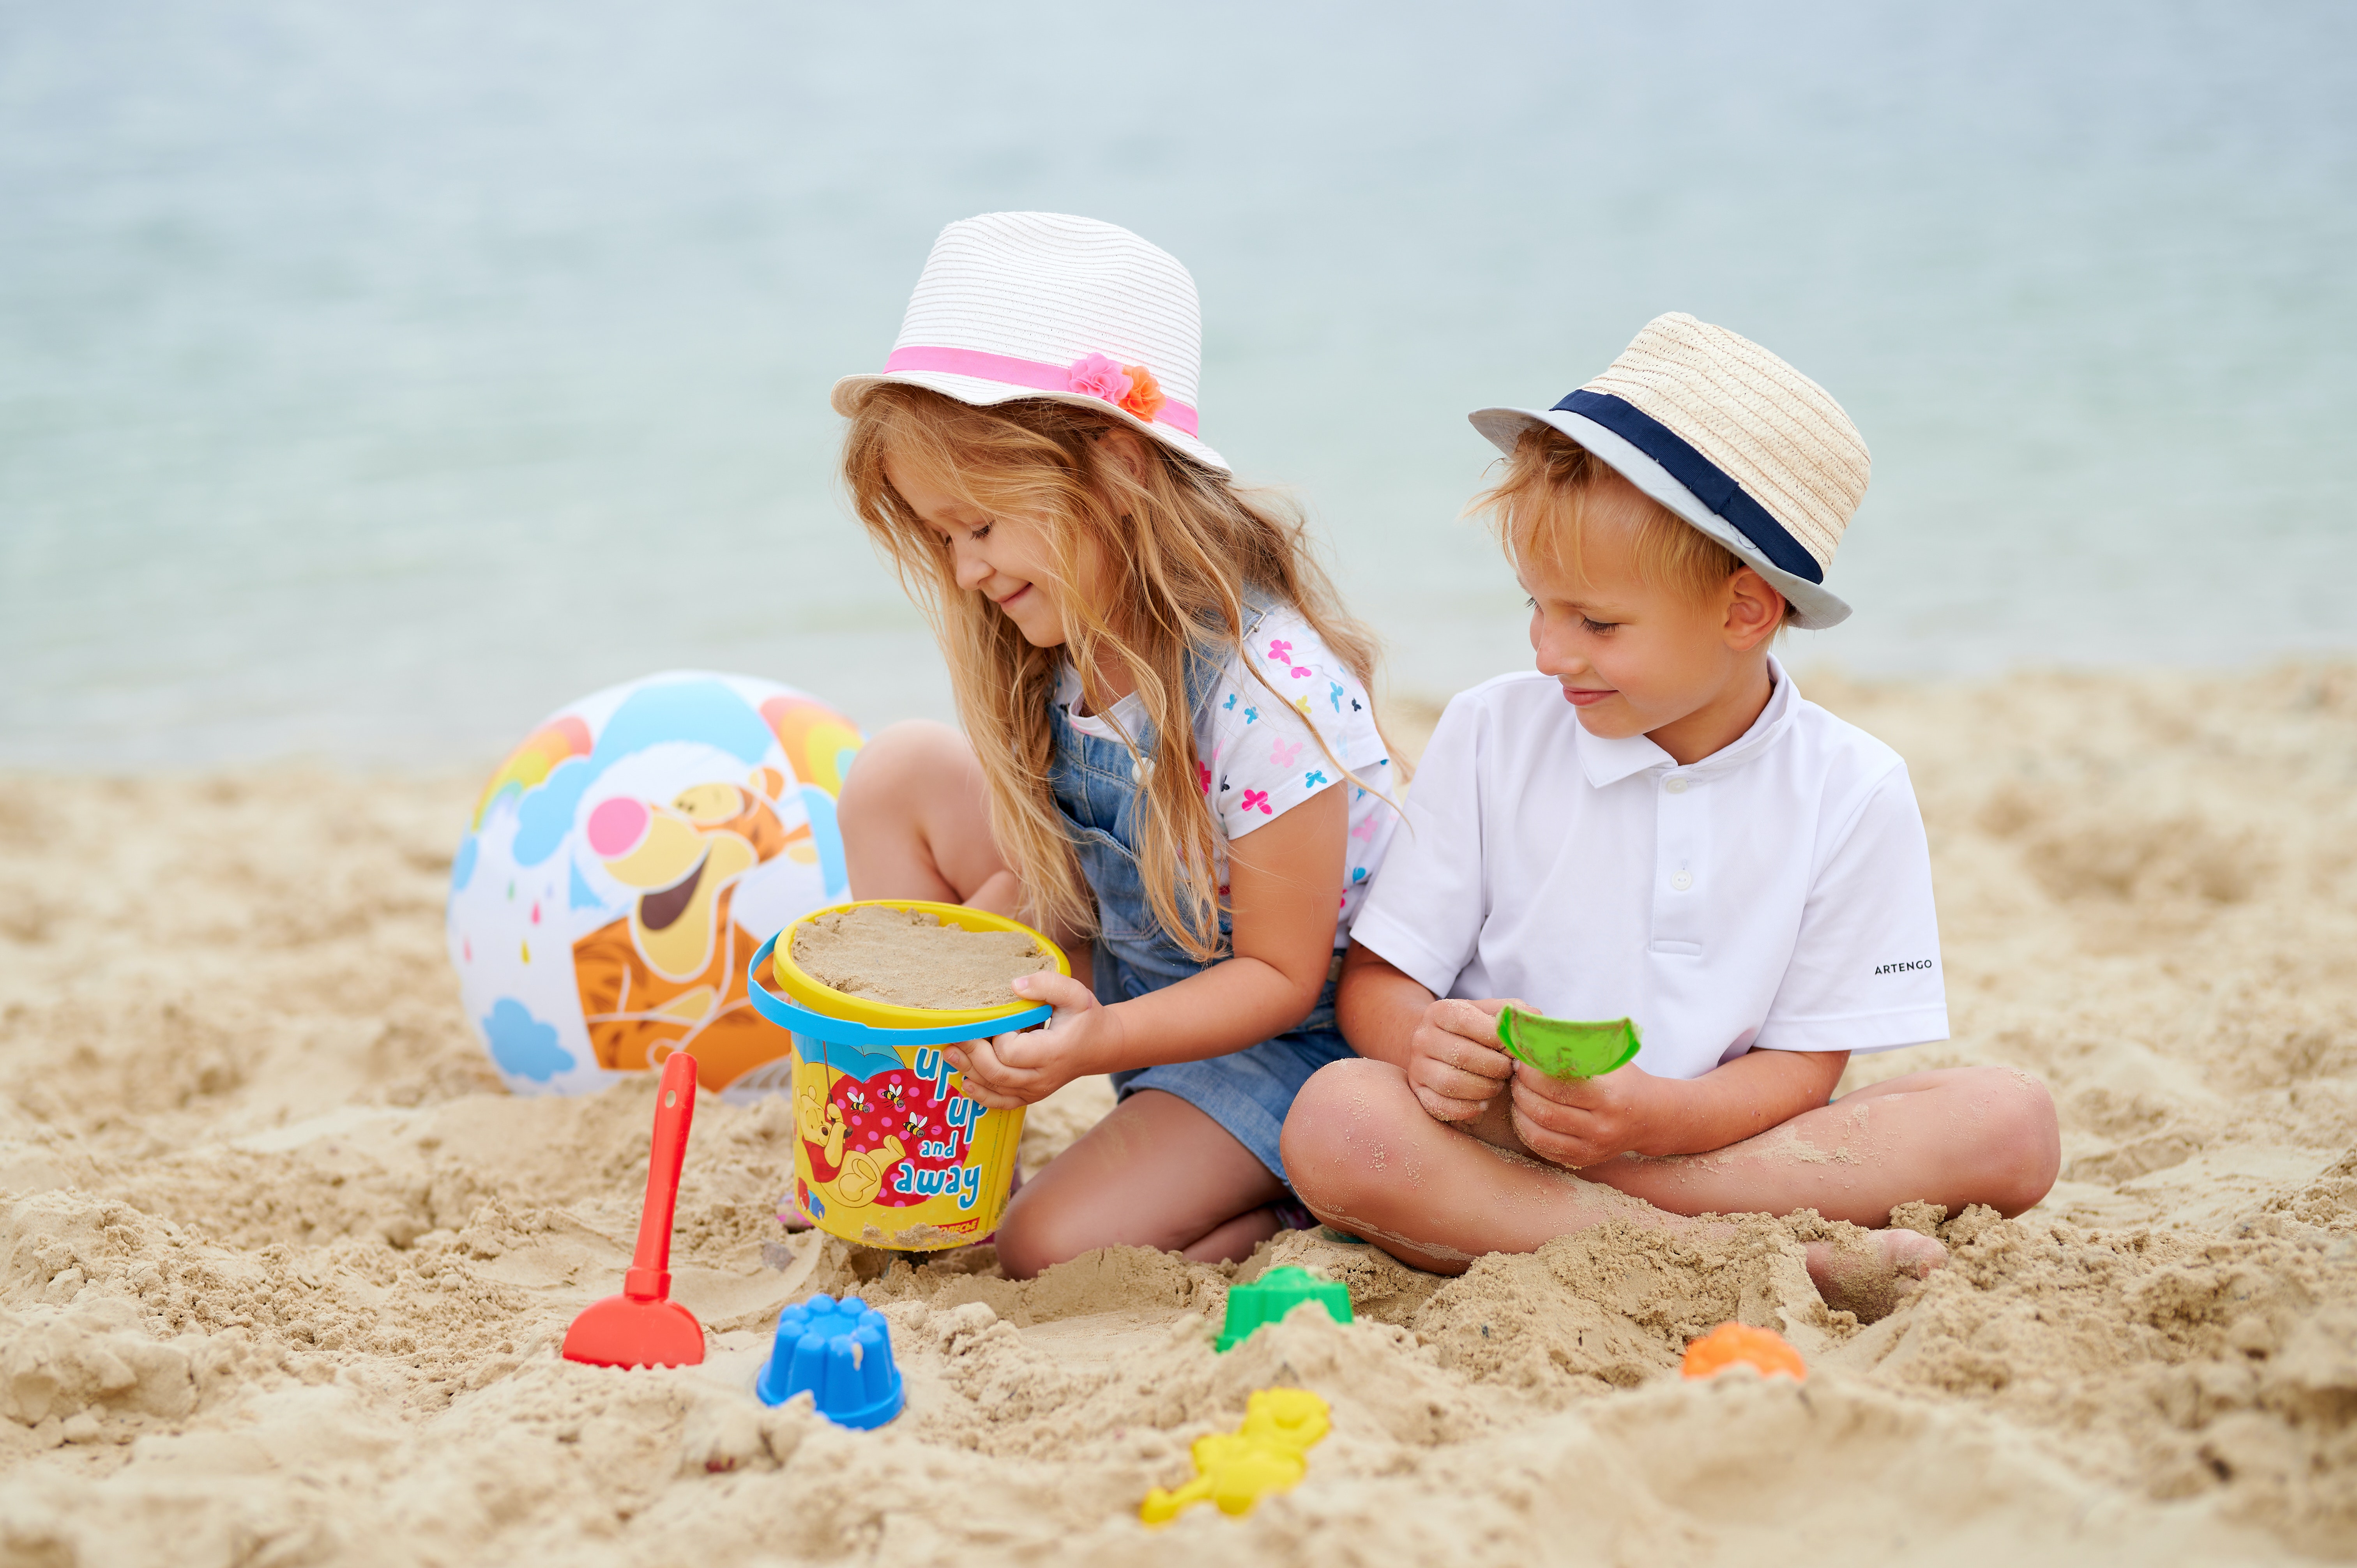 photo by polesie toys: https://www.pexels.com/photo/photo-of-a-girl-and-a-boy-playing-on-the-sand-together-6138085/